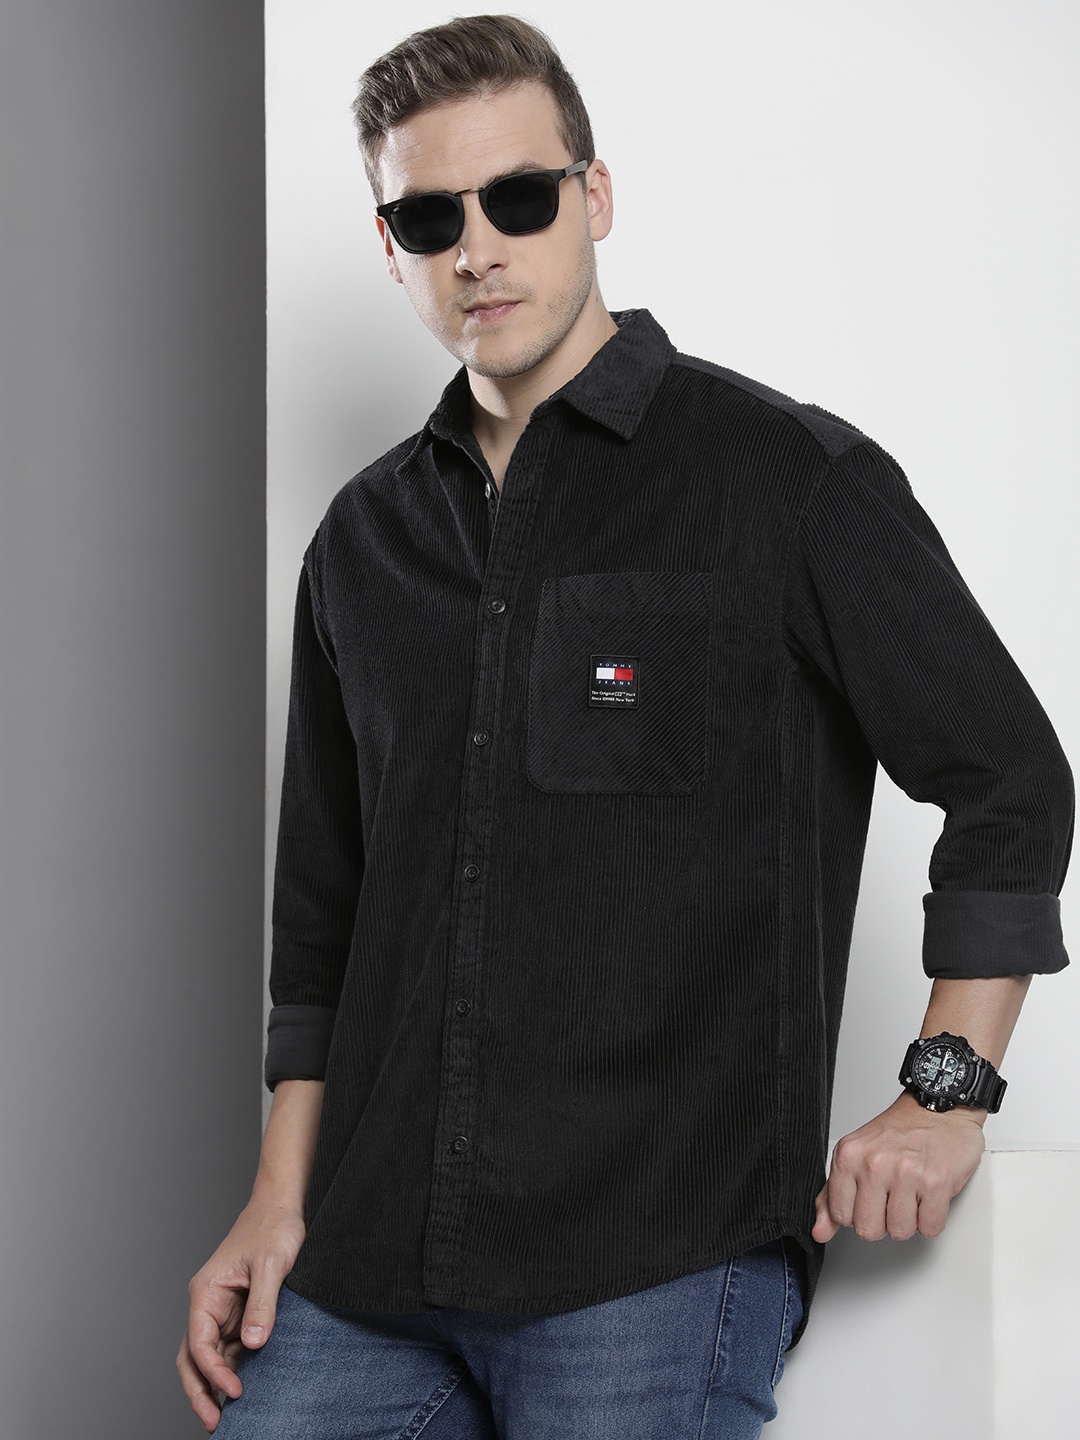 

Tommy Hilfiger Relaxed Fit Corduroy Pure Cotton Casual Shirt, Black